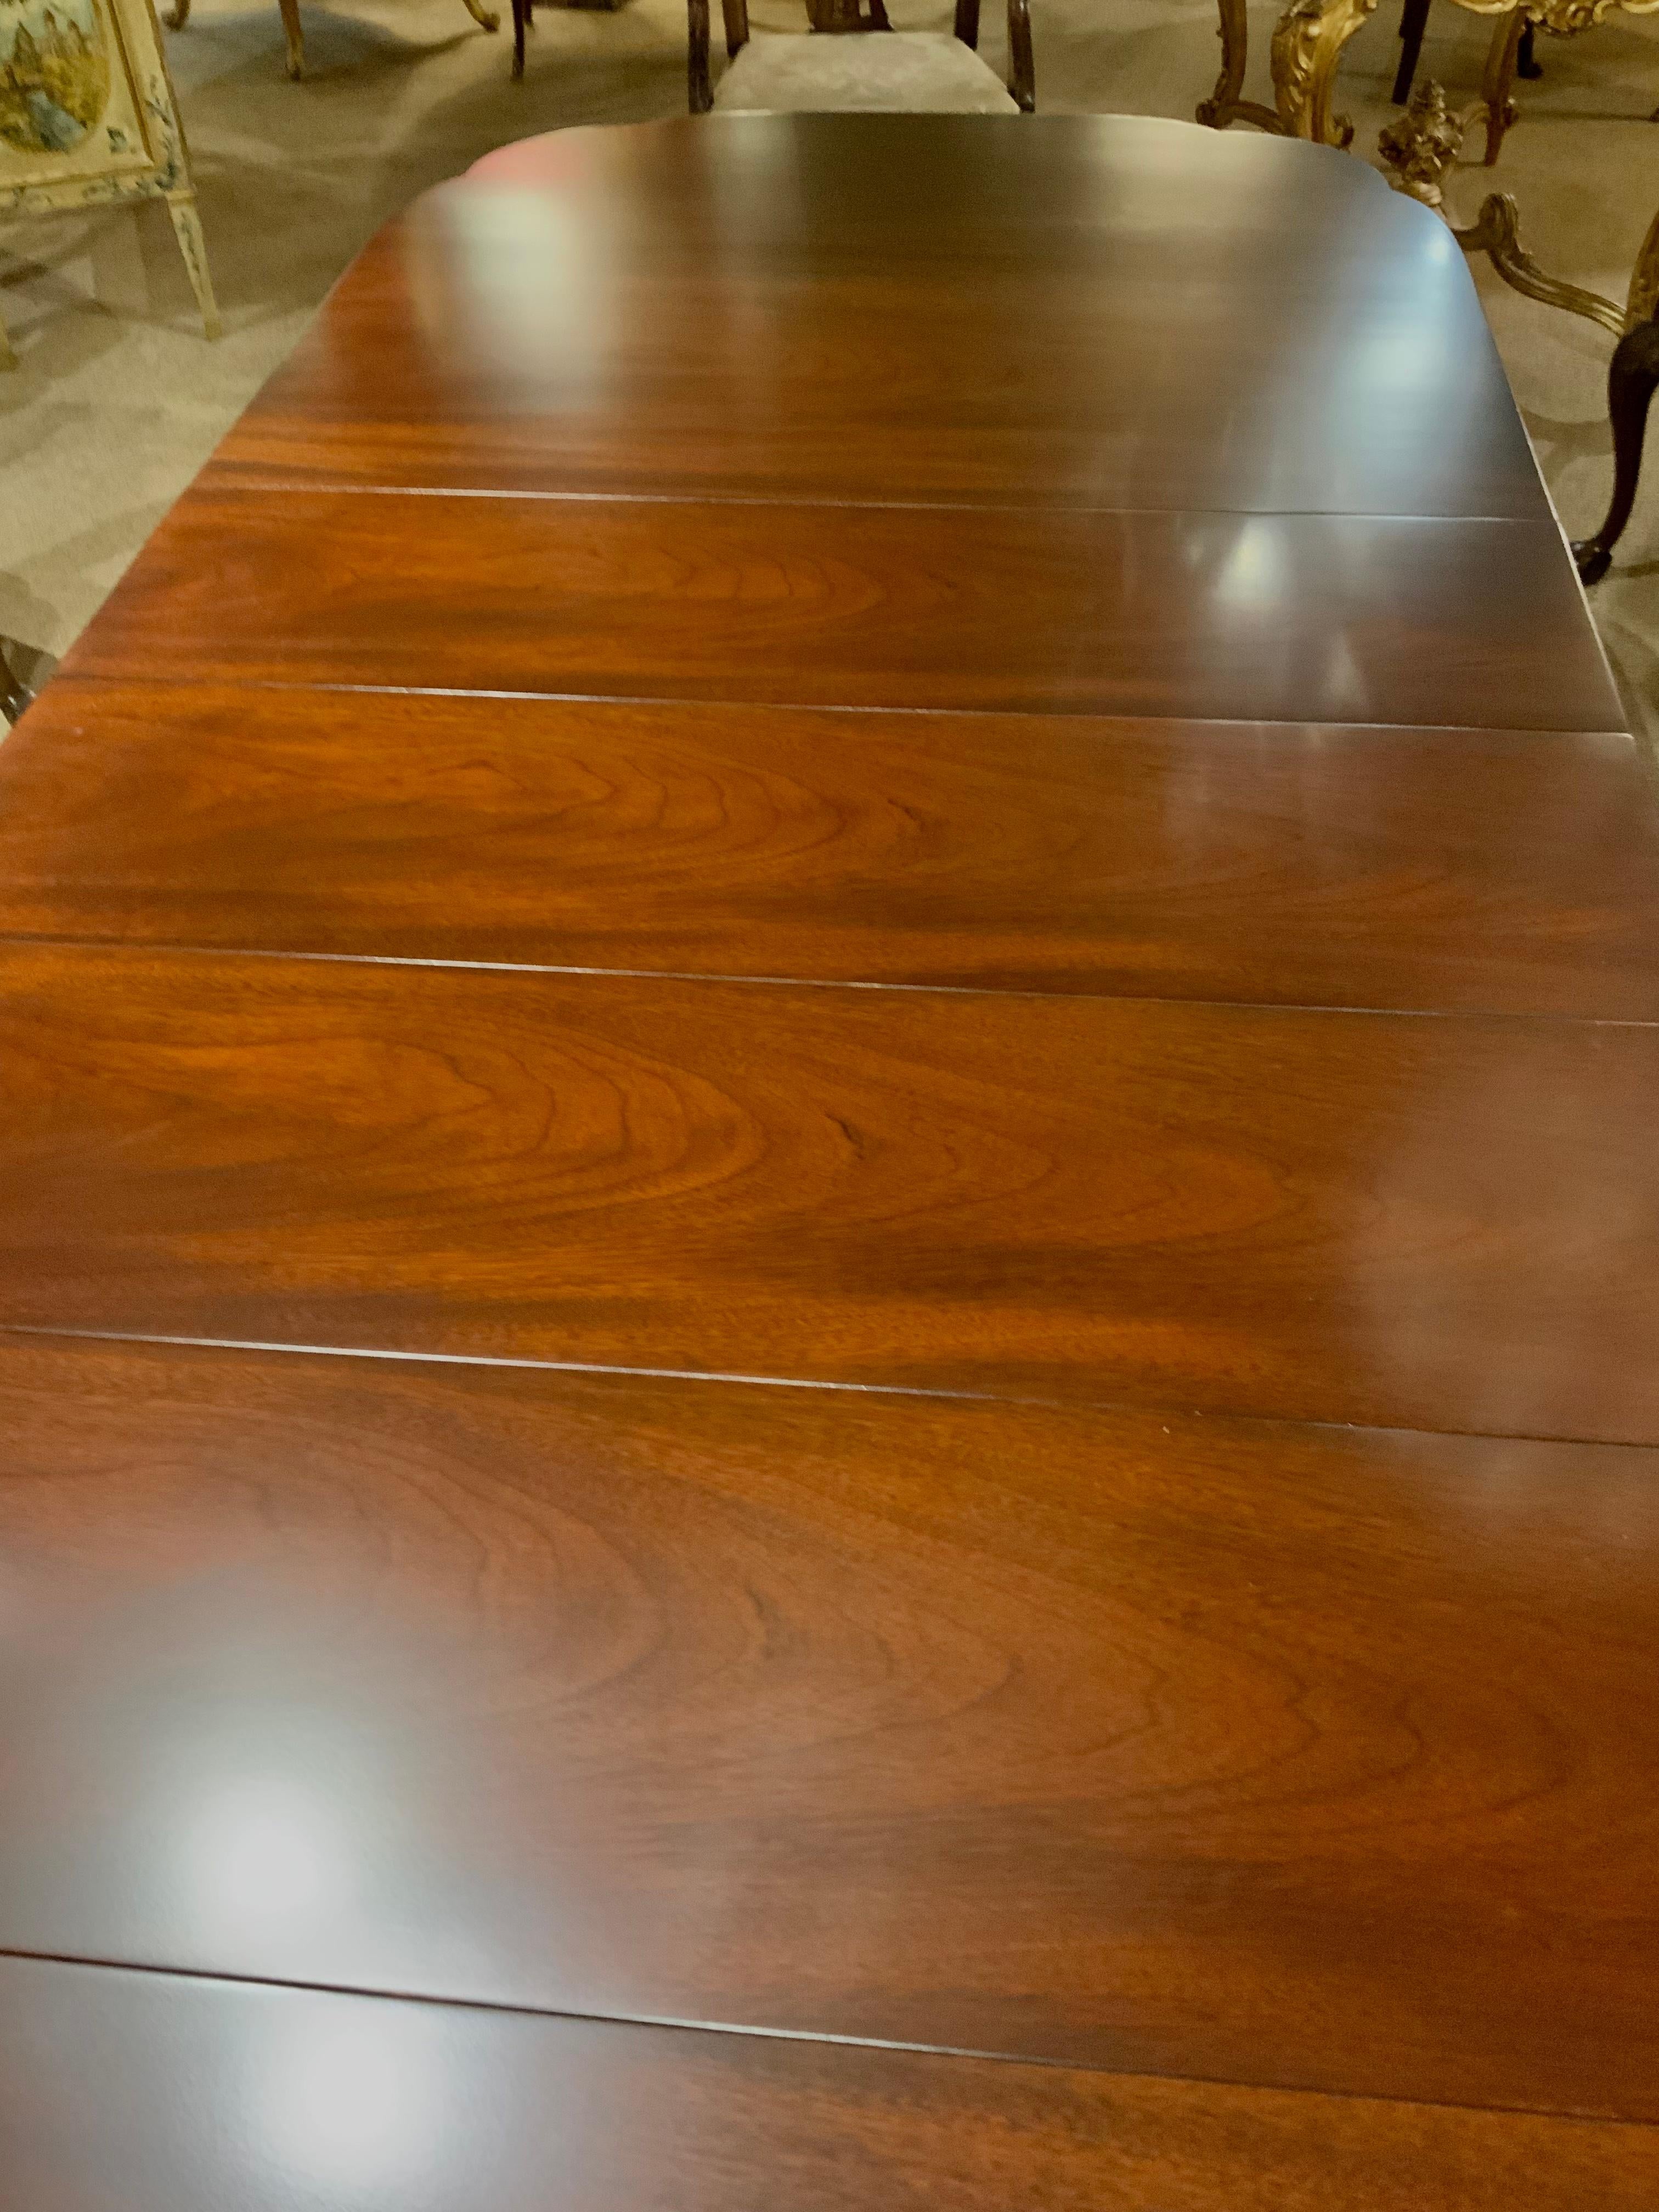 The wood in this table is in exceptional condition and the top is without
Scratches. The D shaped ends are slightly scalloped on the corners.
It has four leaves that slide easily and can be removed to adjust the length. It is
126” fully extended and